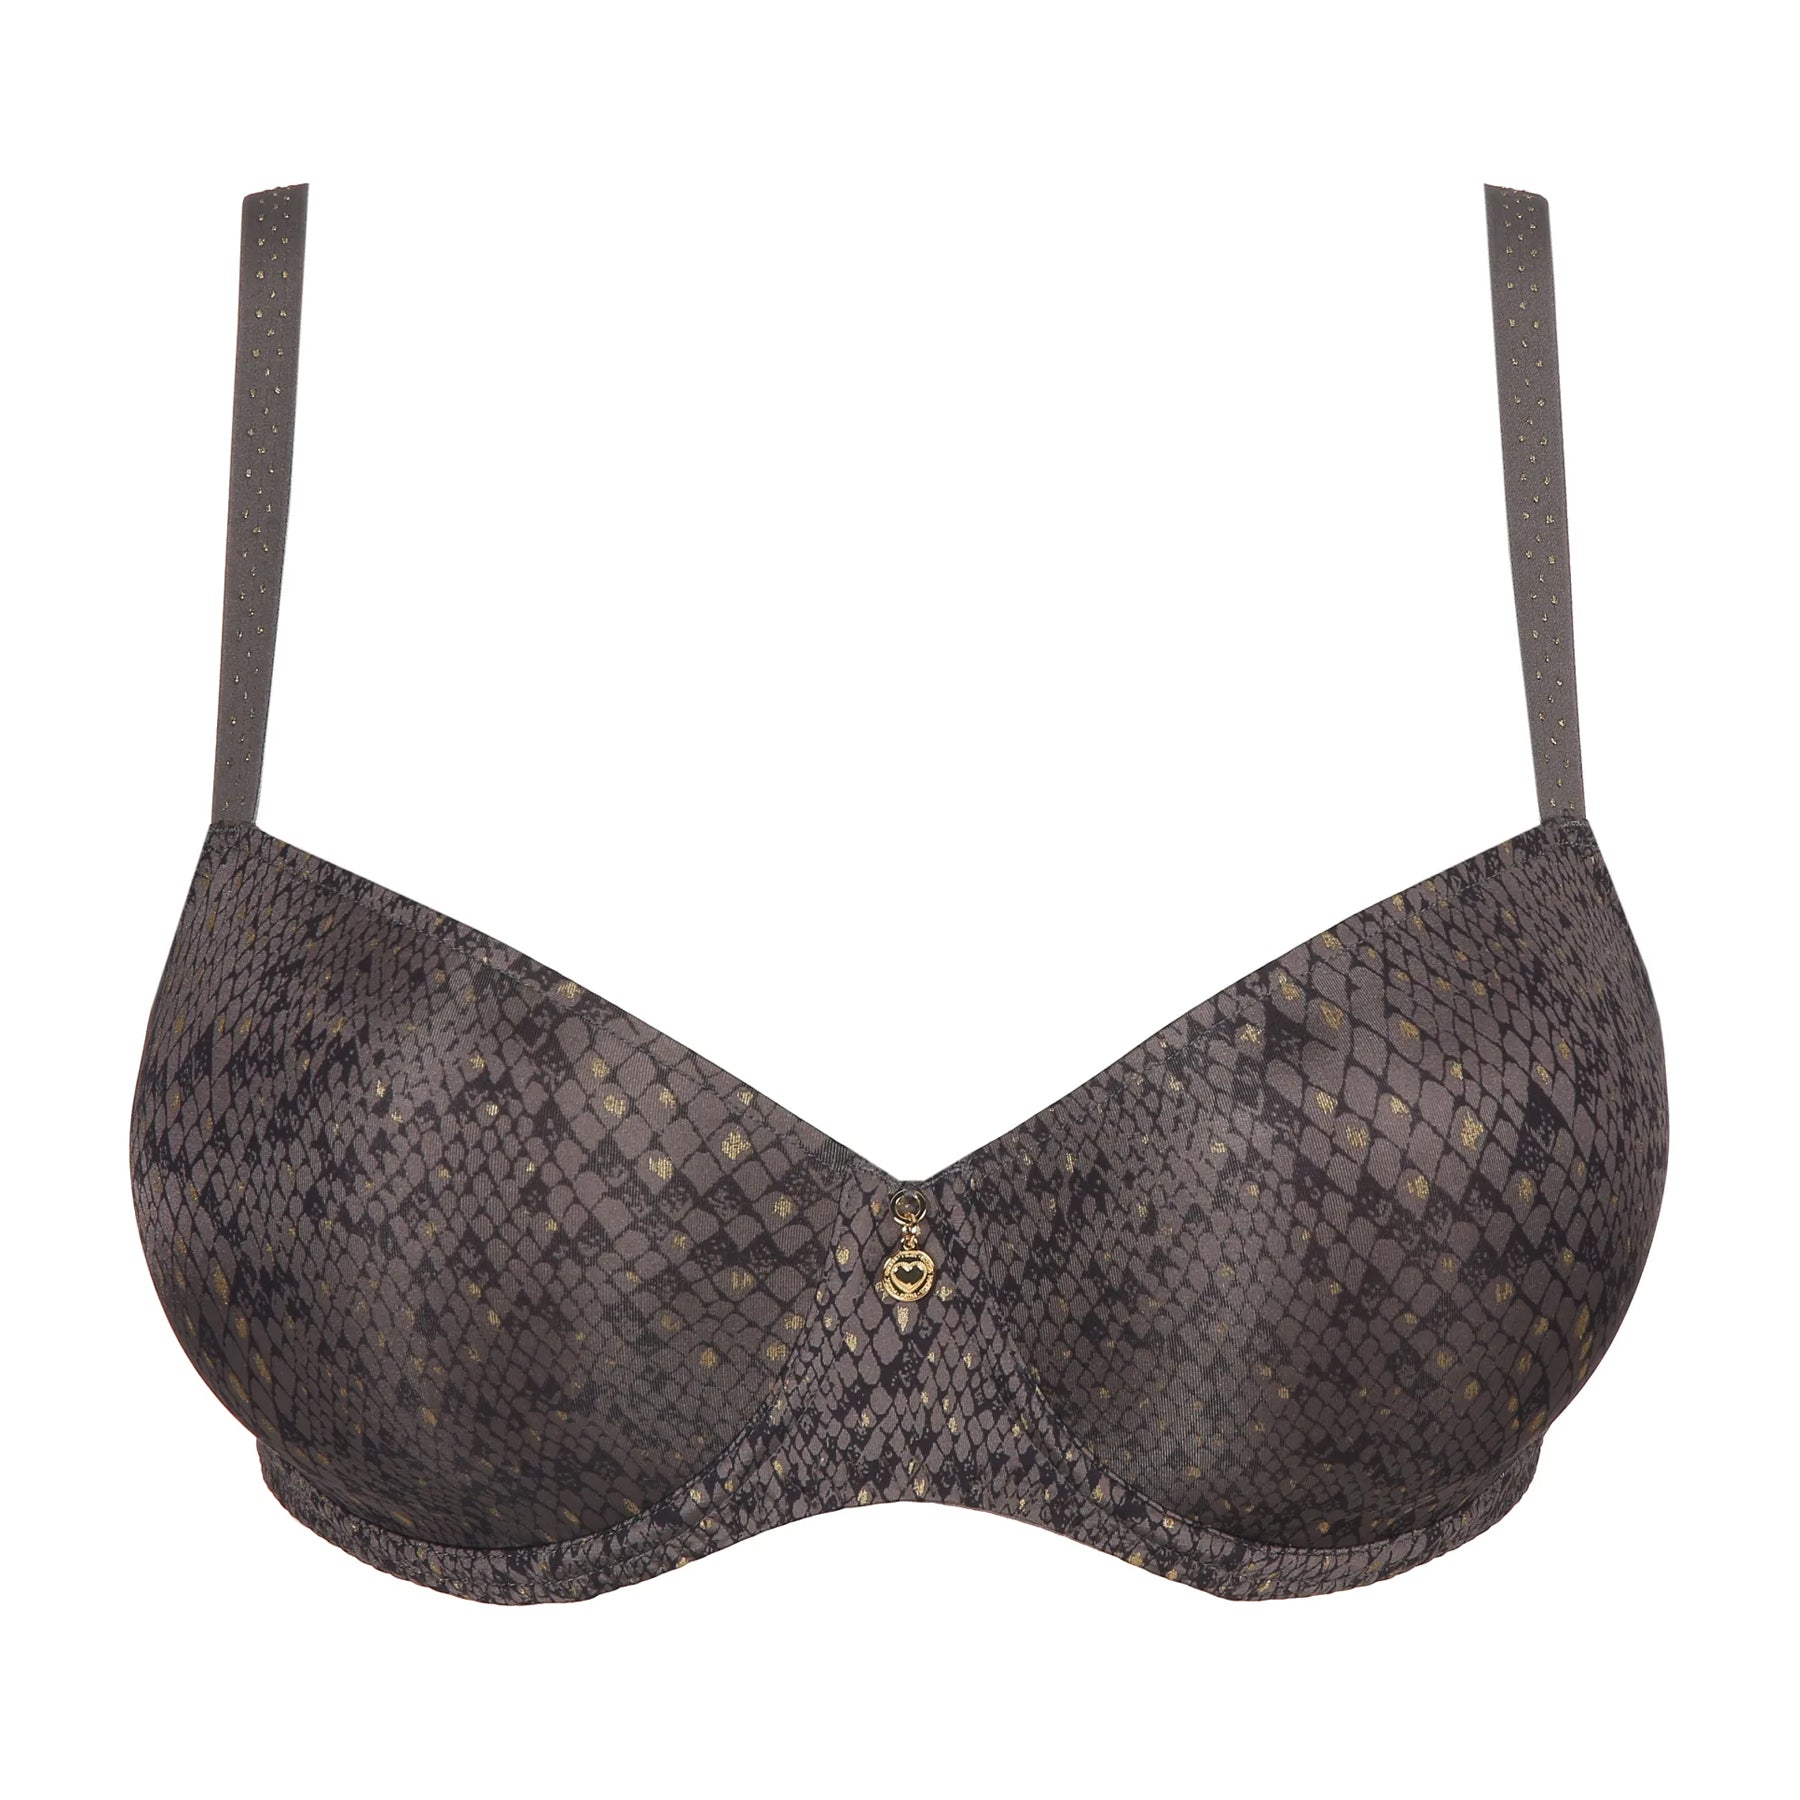 Designer Balcony Bras: Shop Our Hand-Picked Collection